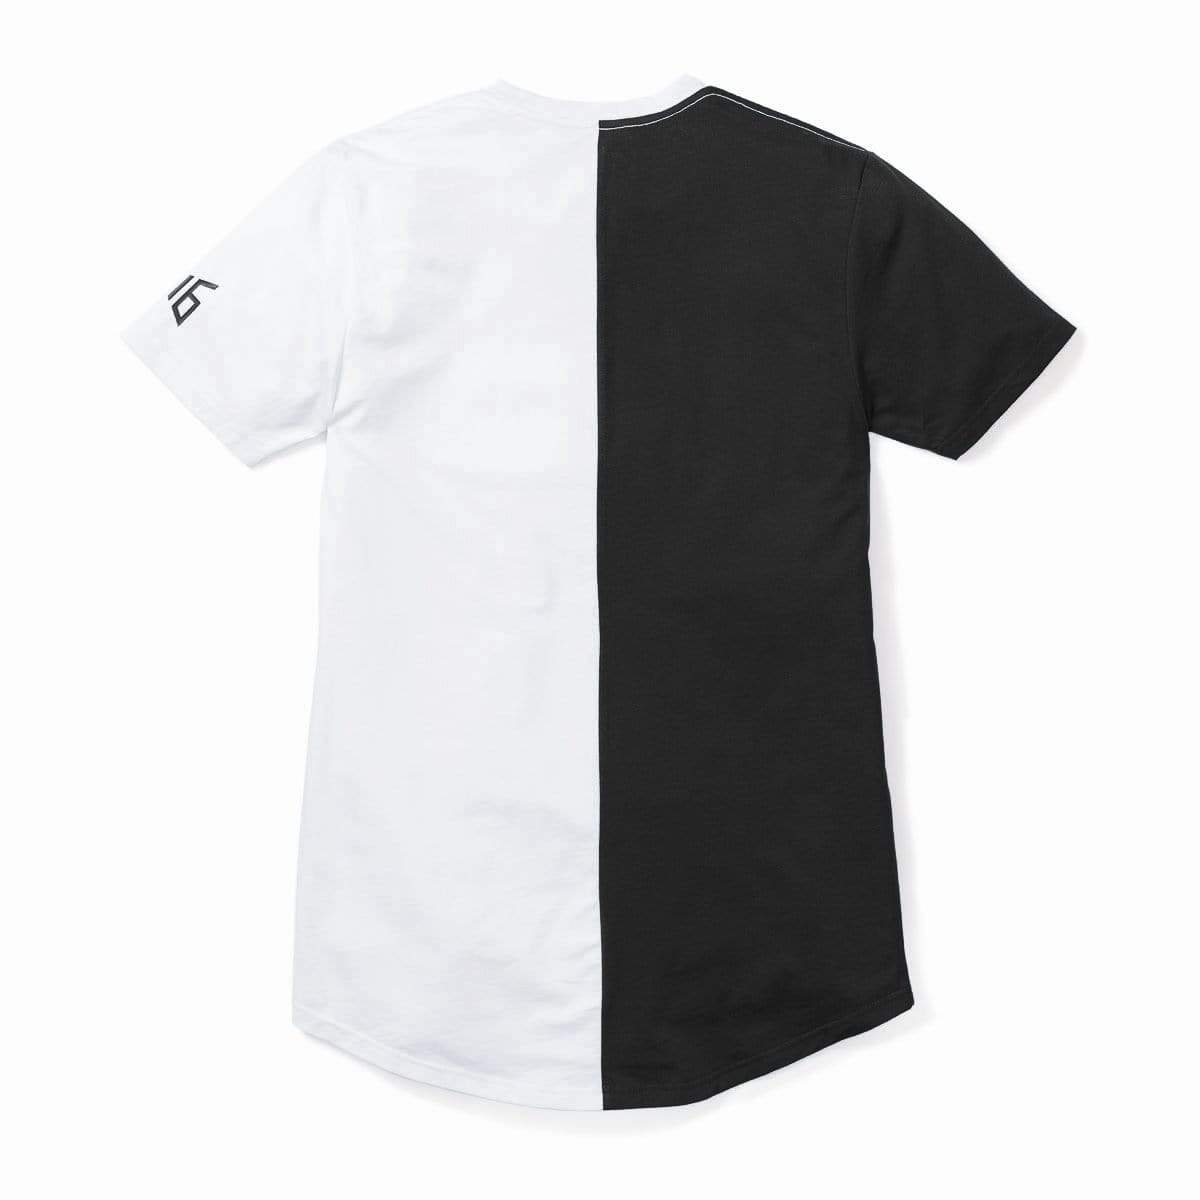 3:16 Collection Apparel Salvation Vertical Block Swoop Tee - Black and White